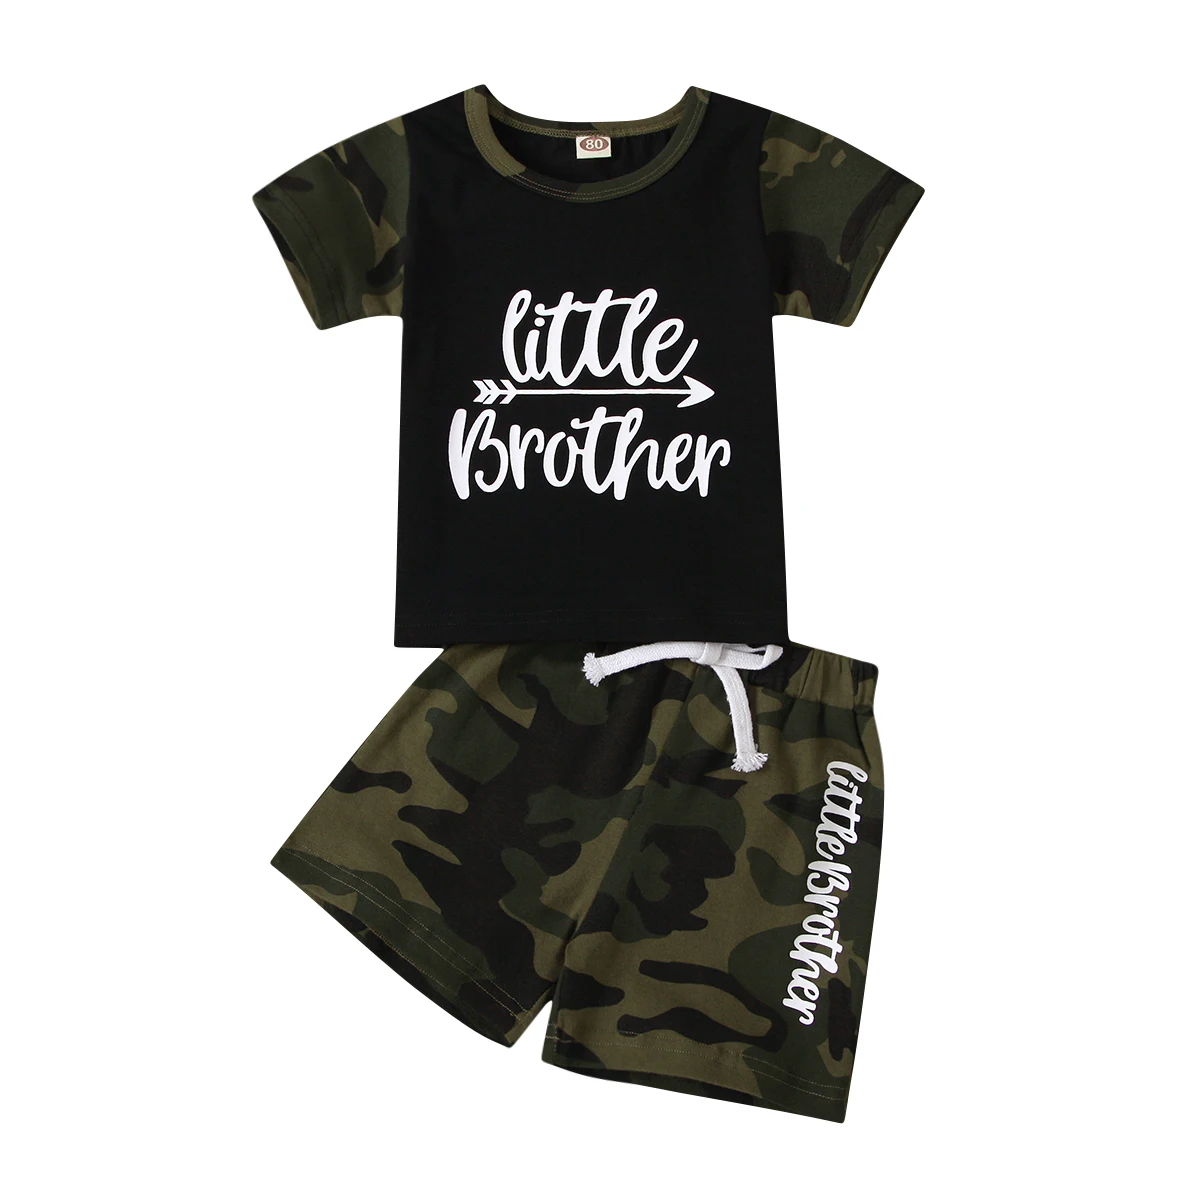 

OPPERIAYA Baby Boys Short-sleeve Tops Shorts Summer casual Set Fashion Letter print Round Neck Tops and Camouflage Short Pants